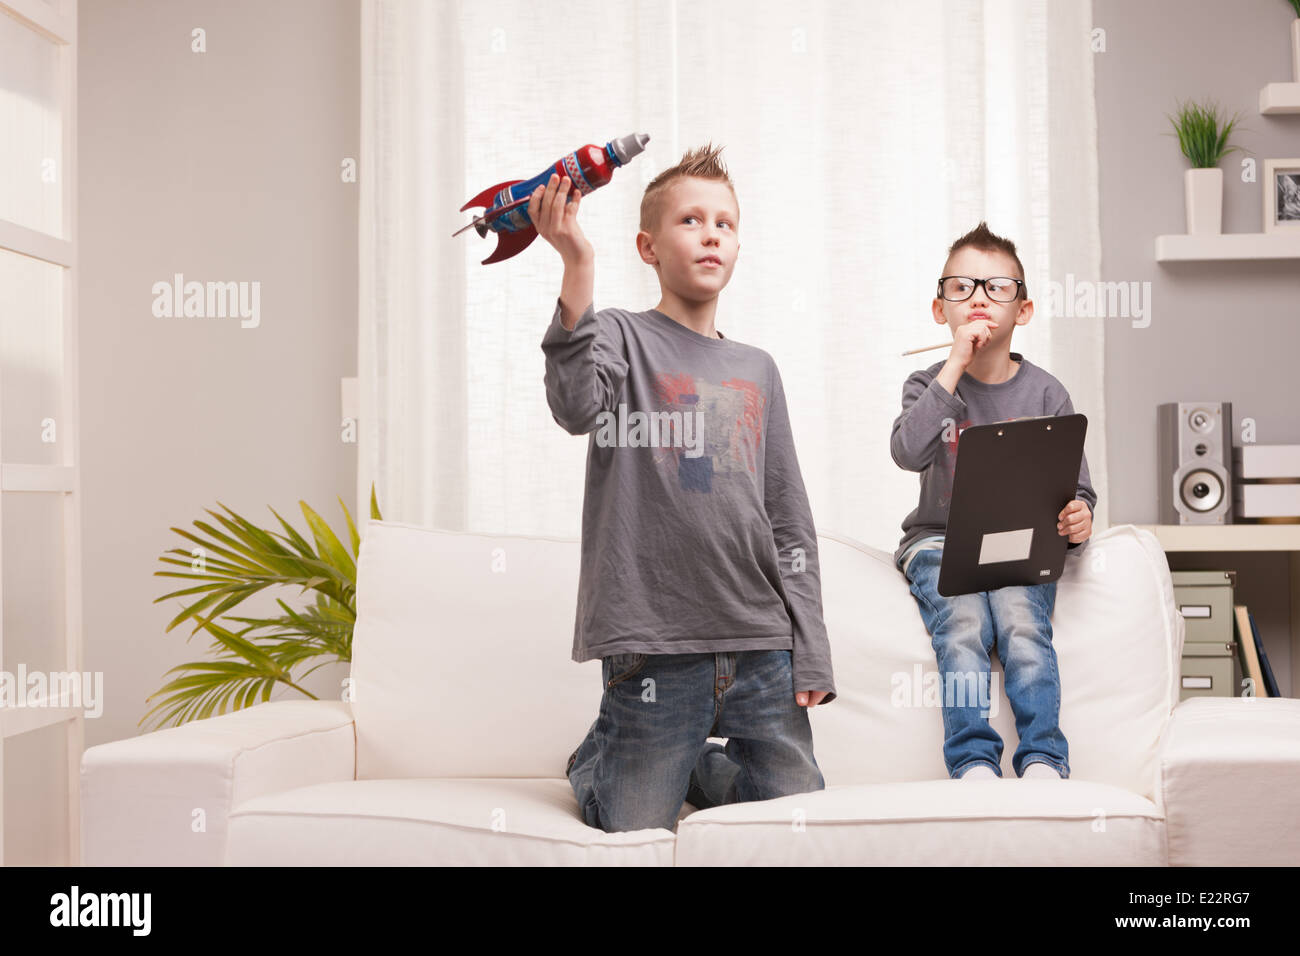 two boys playng as scientists and rocket inventors Stock Photo